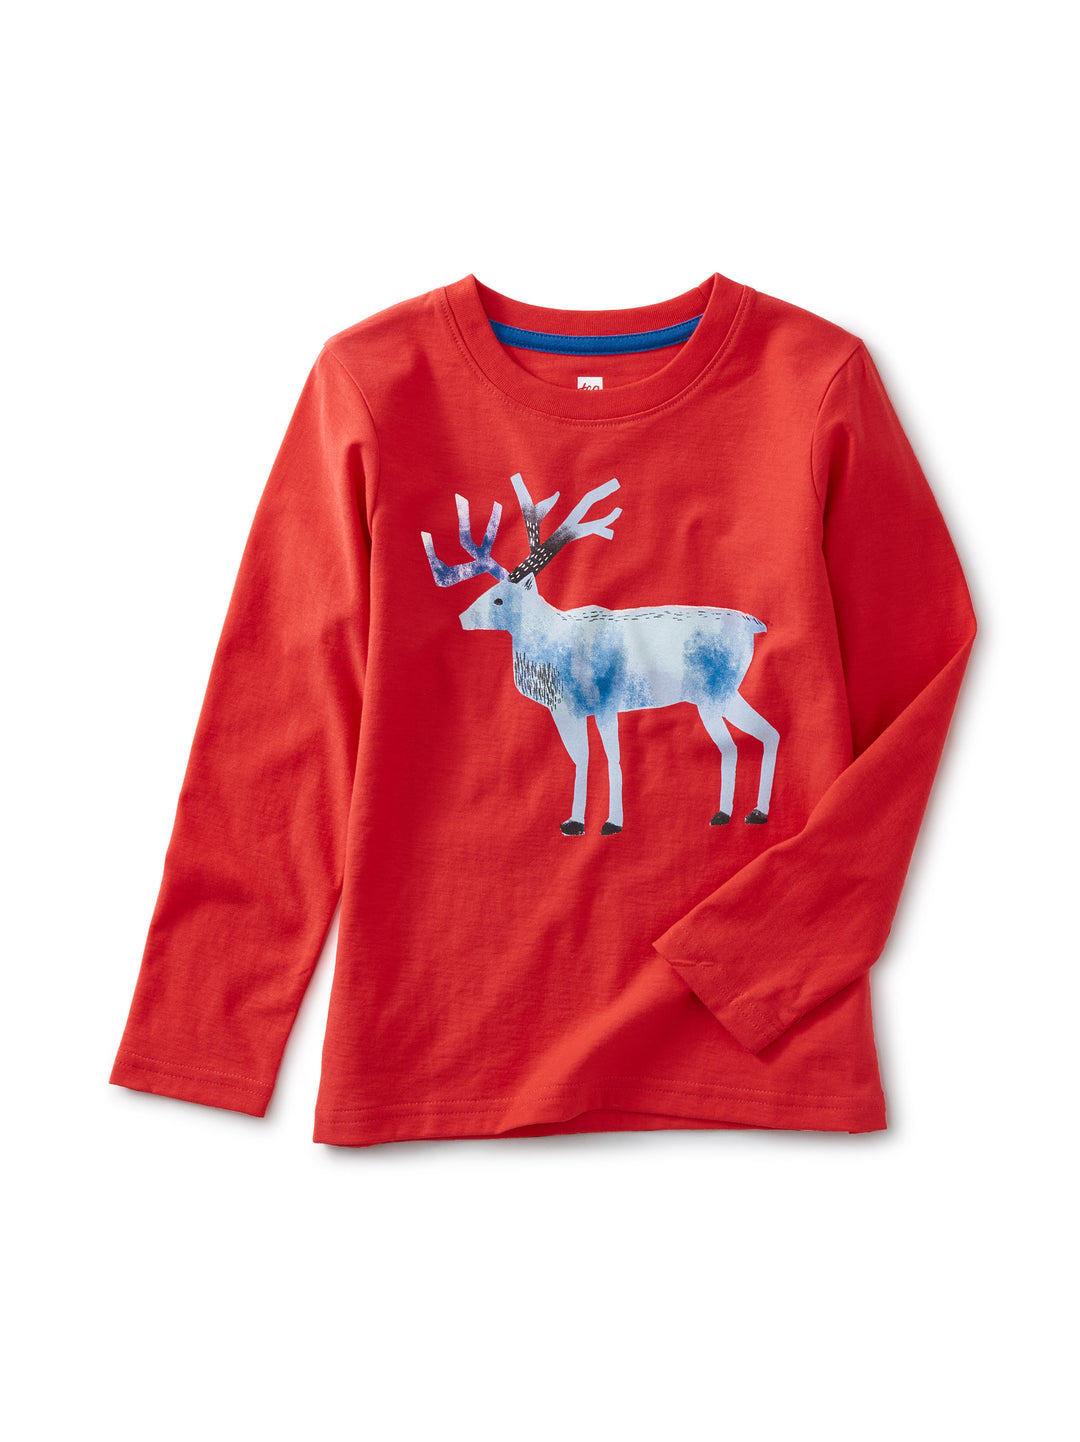 Stalwart Stag Graphic Tee